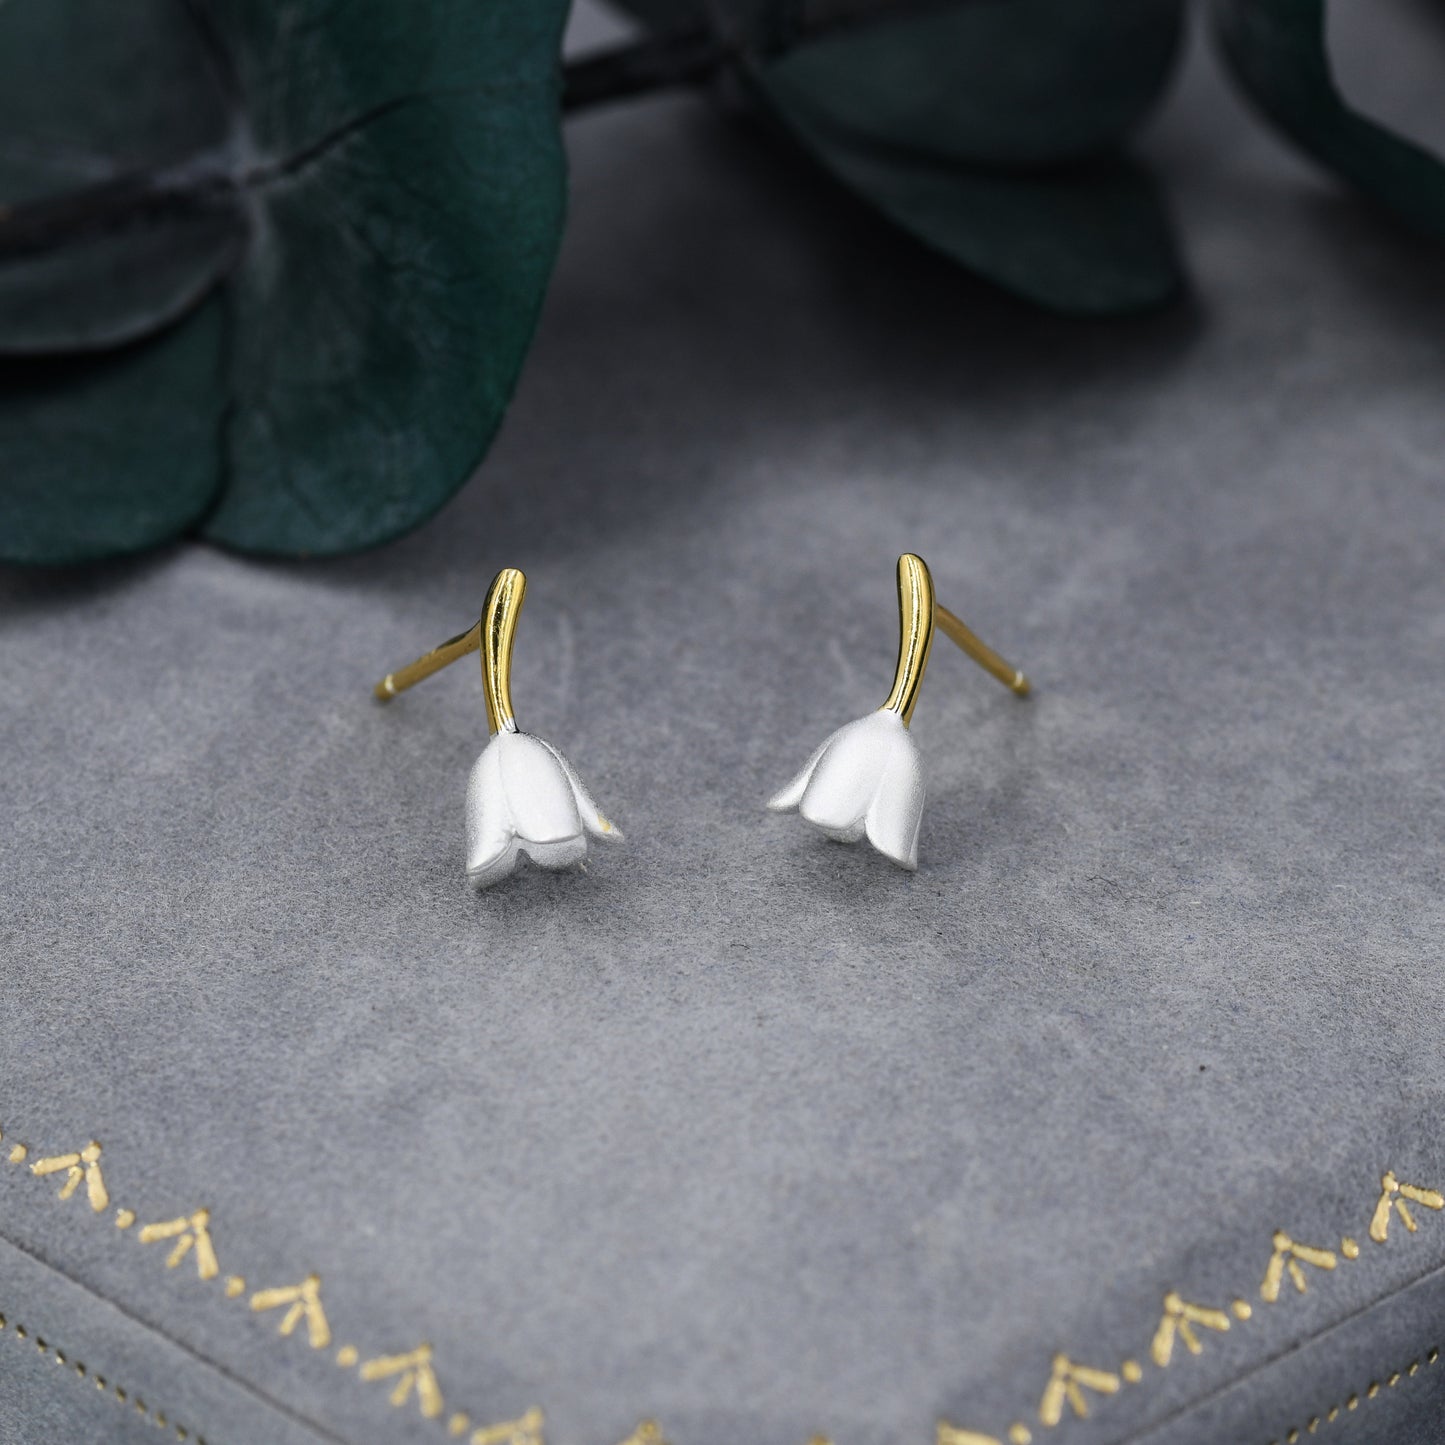 Lily of the Valley Flower Stud Earrings in Sterling Silver - Flower Blossom Stud Earrings  - Cute,  Fun, Whimsical